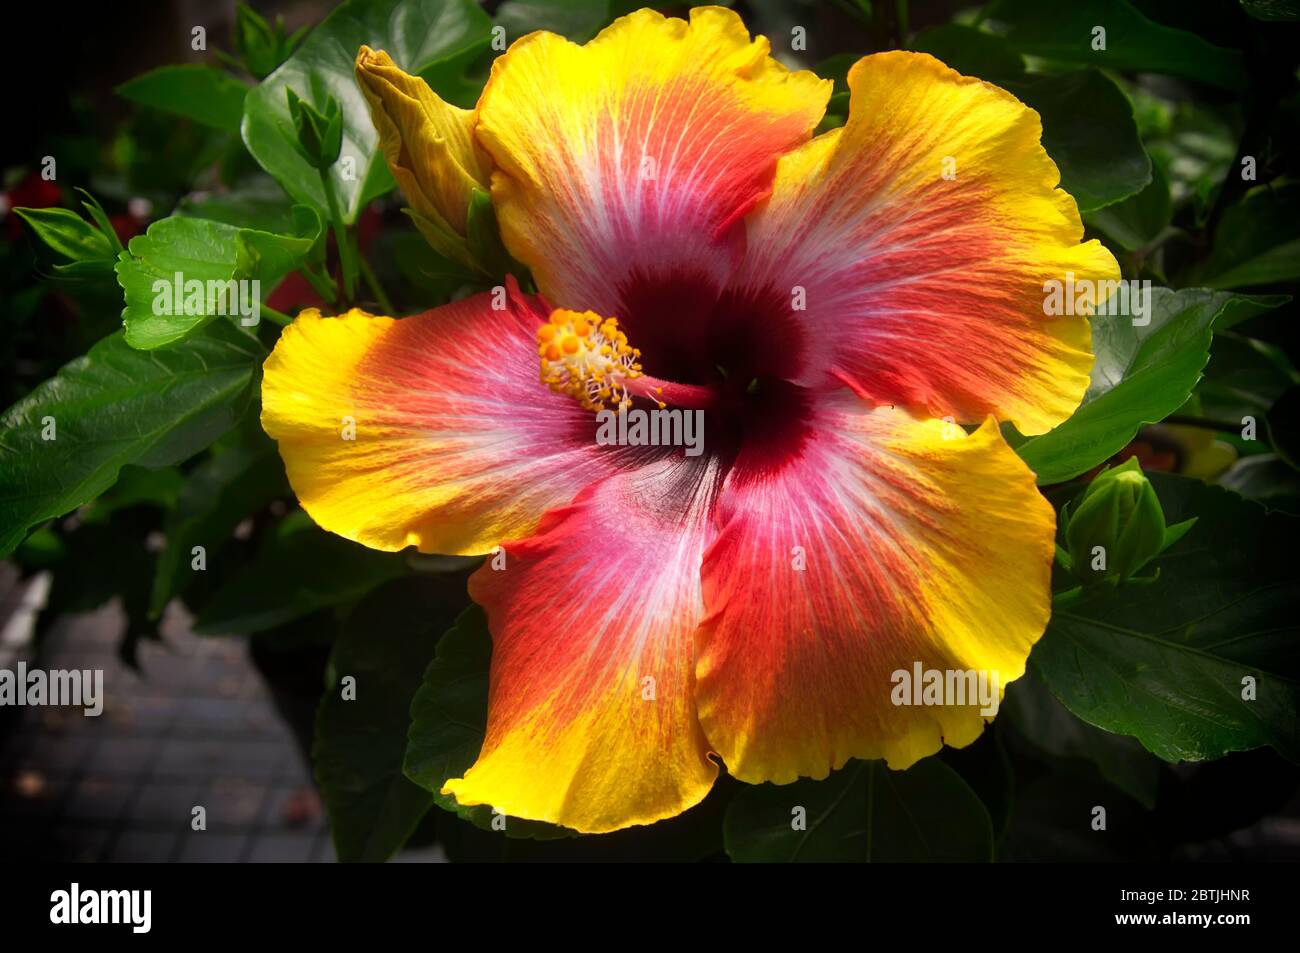 A sunset variety of a blooming hibiscus flower against a green background in a greenhouse. Stock Photo